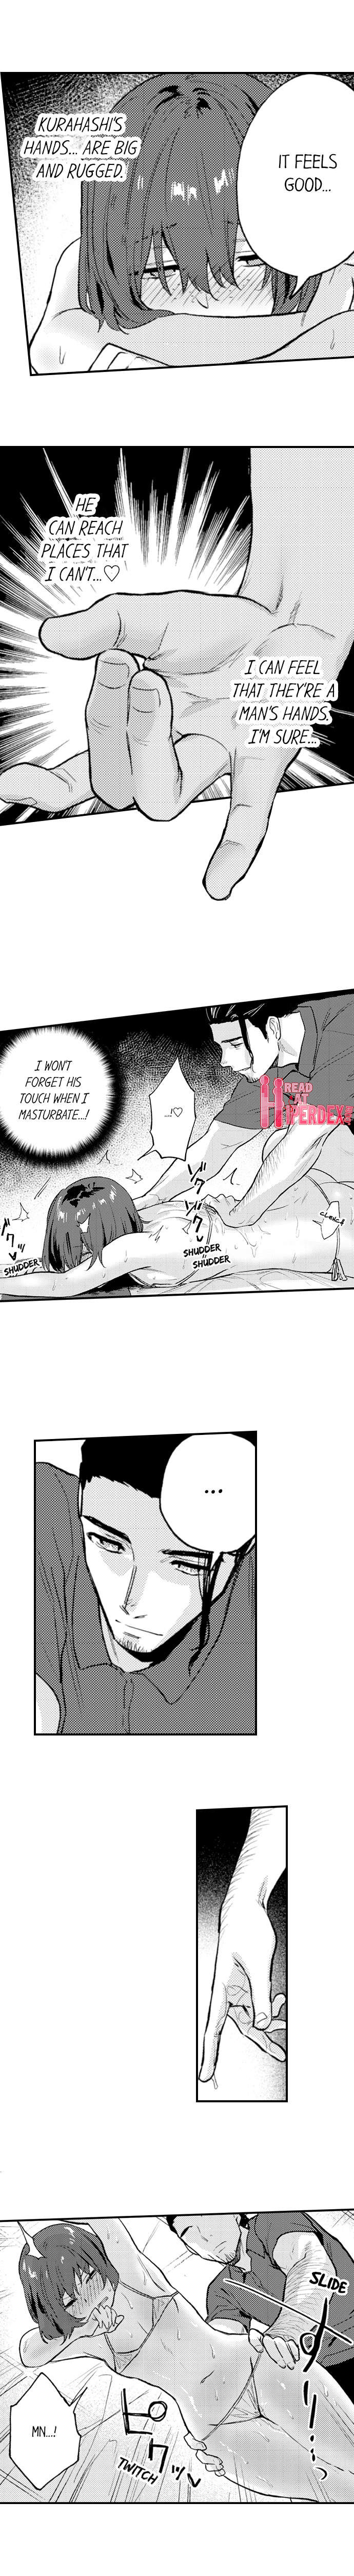 The Massage ♂♀ The Pleasure of Full Course Sex Chapter 1 - Page 4